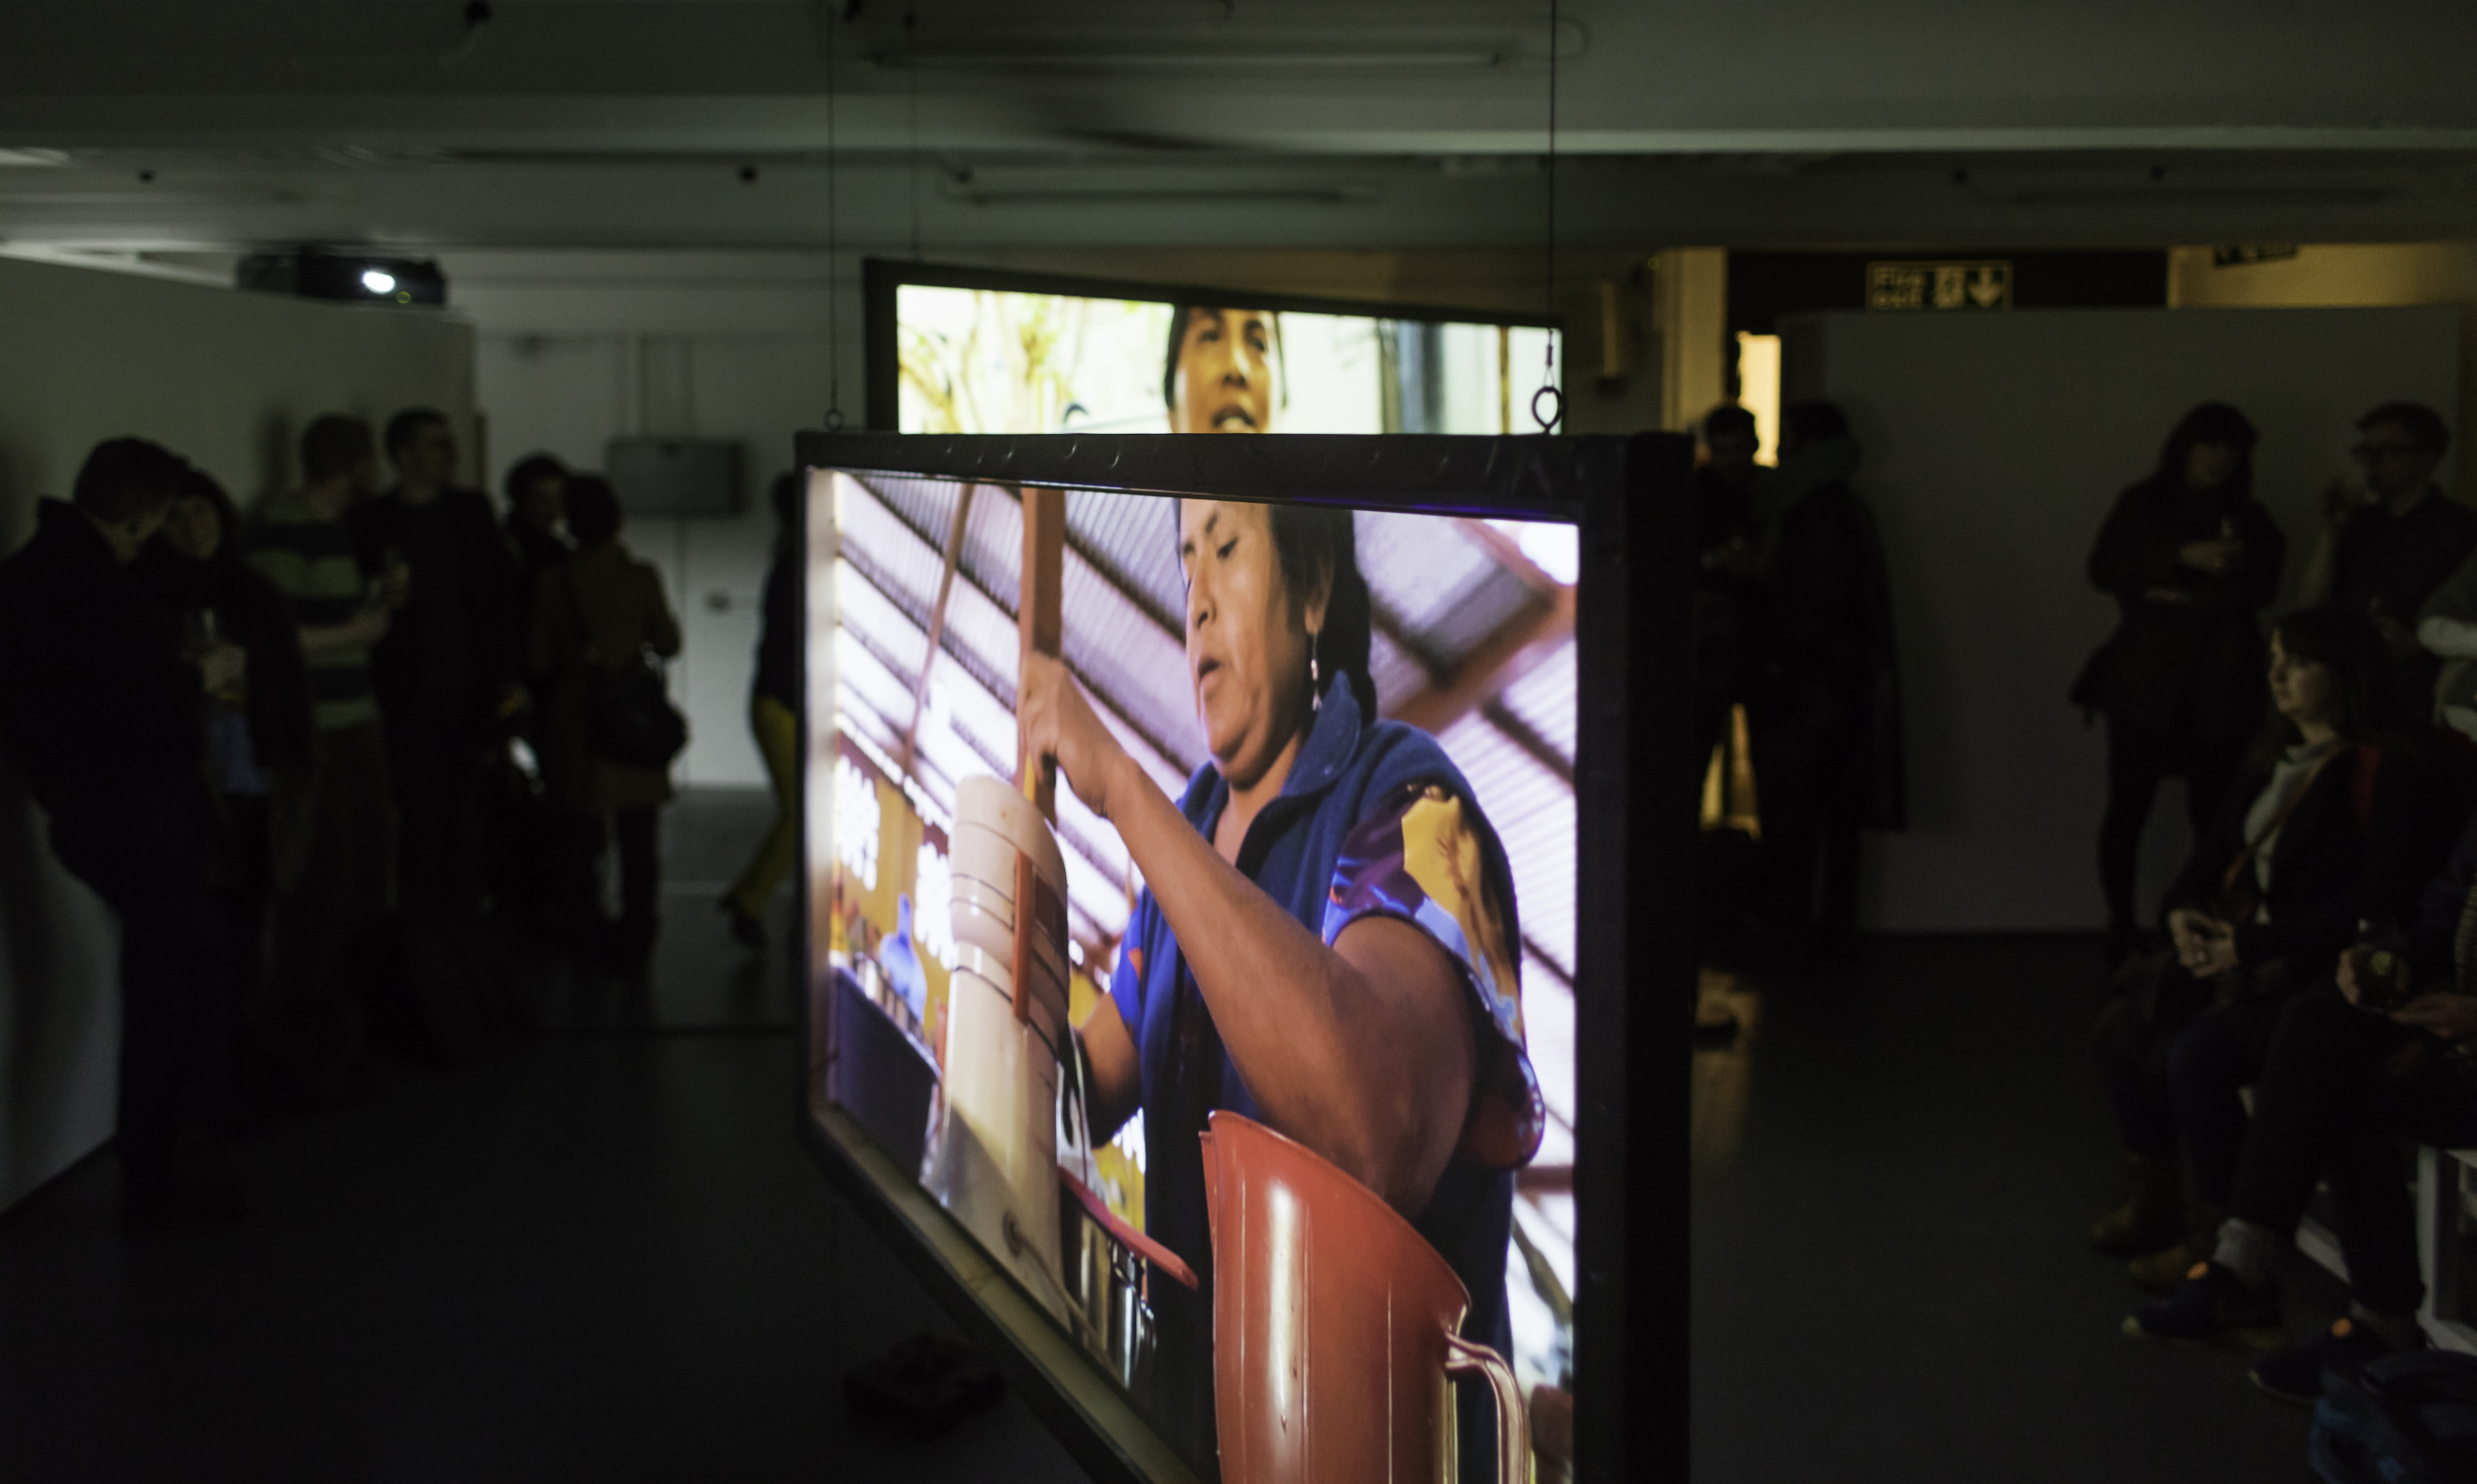 A large hanging screen shows a projection of a woman mixing something. In the background is the top edge of another screen and in the darkened gallery space we can see crowds of people watching the two films